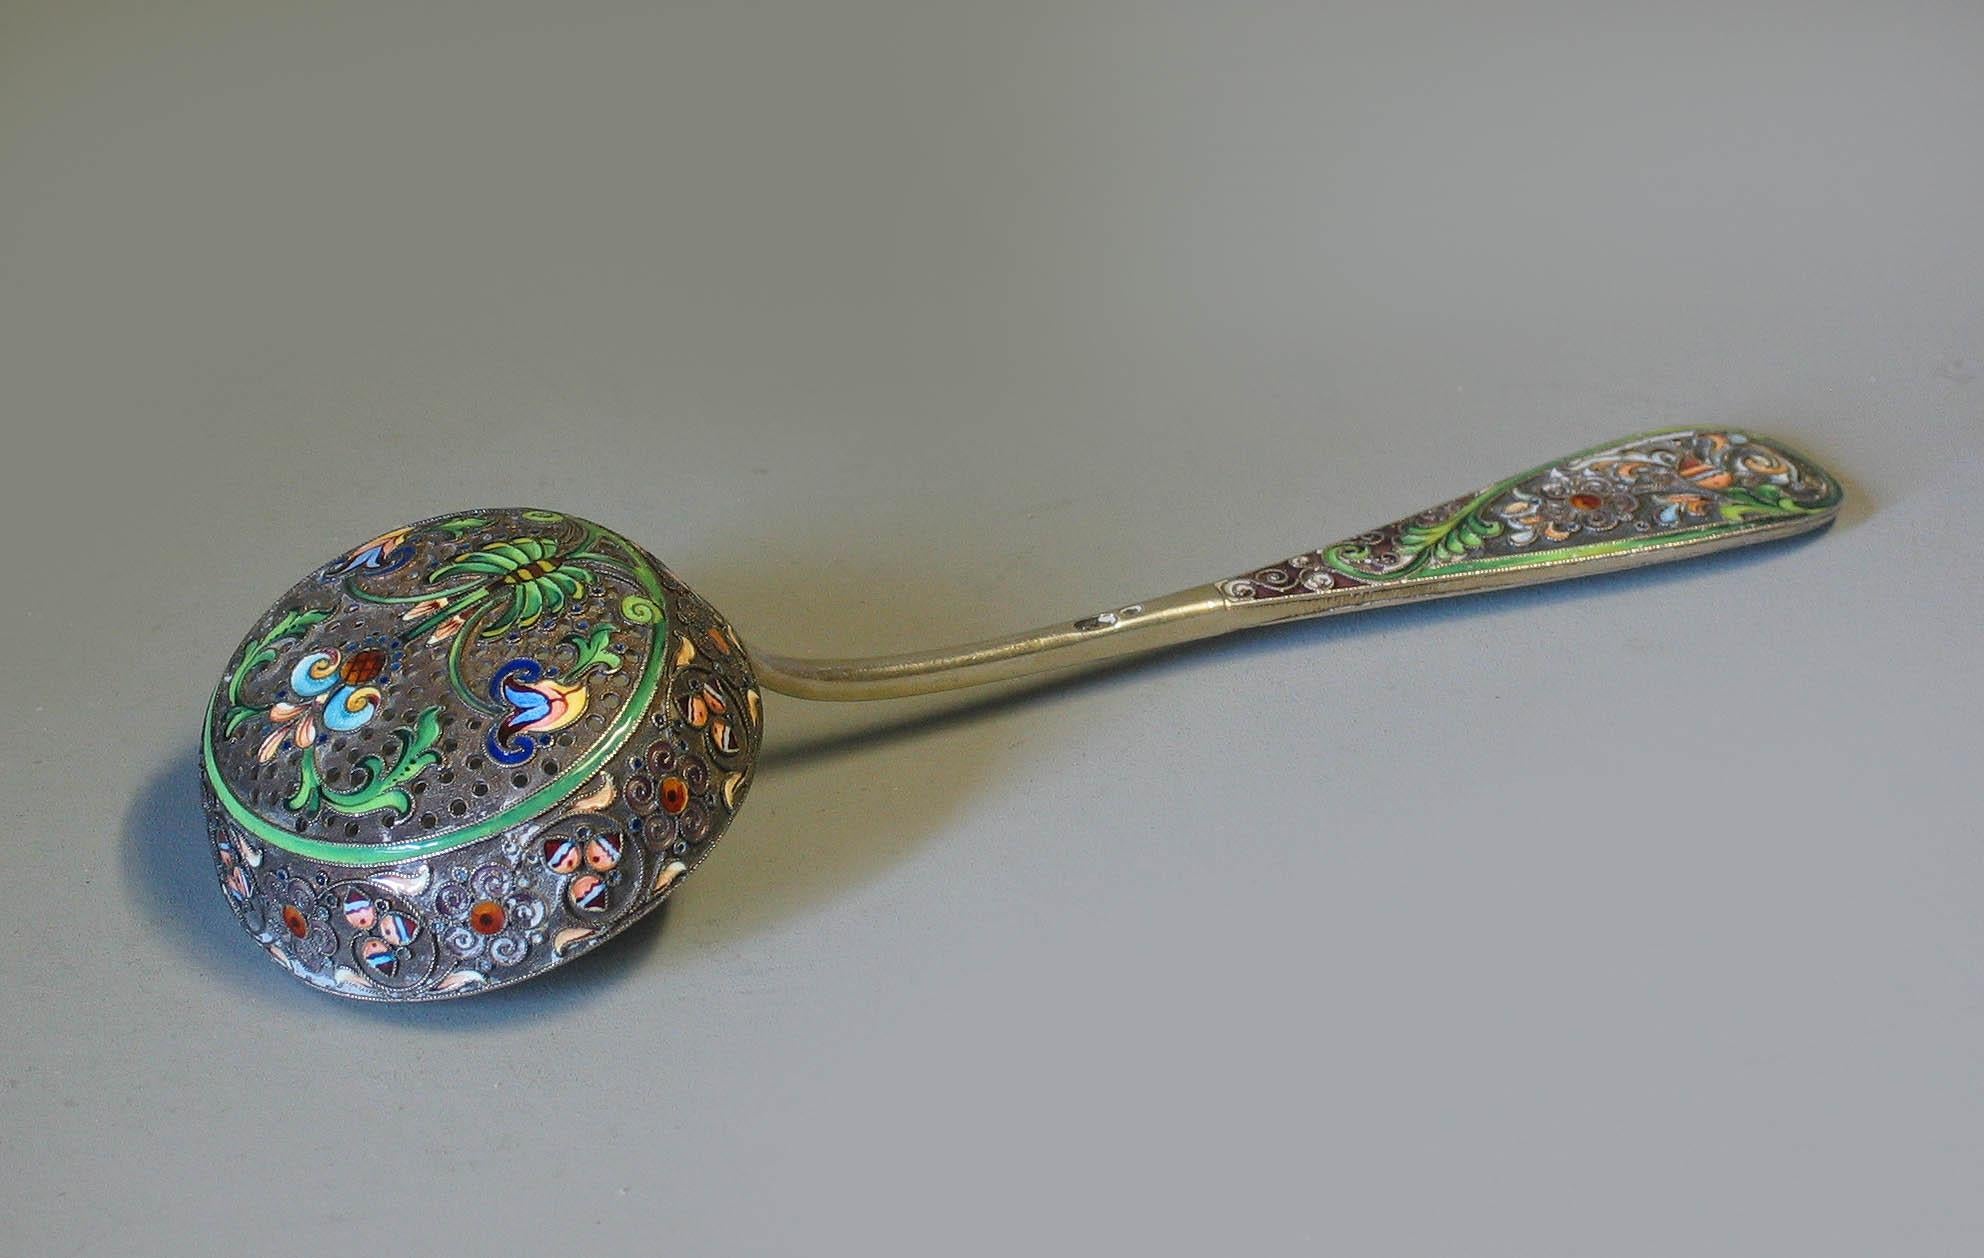 20th Century Russian Silver-Gilt & Cloissone Enamel Sifter Spoon 11th Artel Moscow, 1908-1917 For Sale